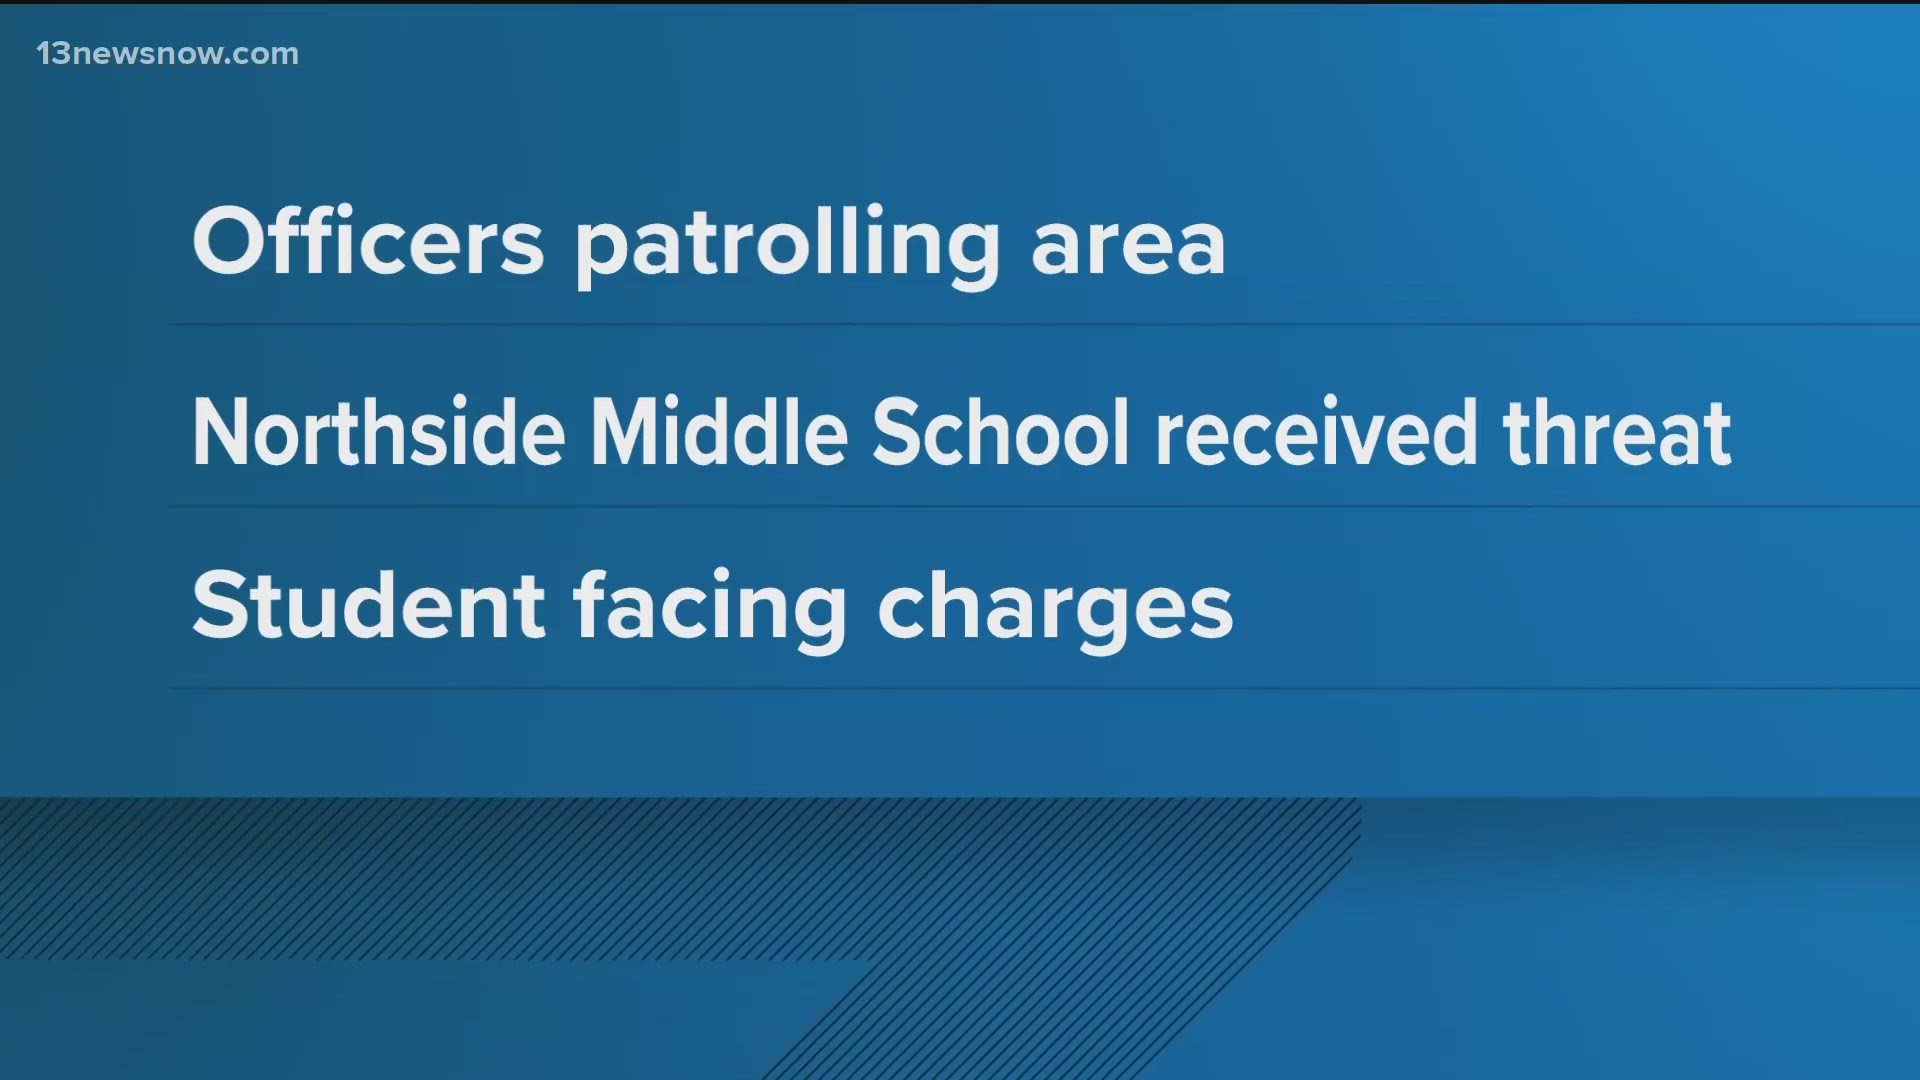 A student has been charged after making a threat toward Northside Middle School. Norfolk police say officers will be in the area of the school as a precaution.